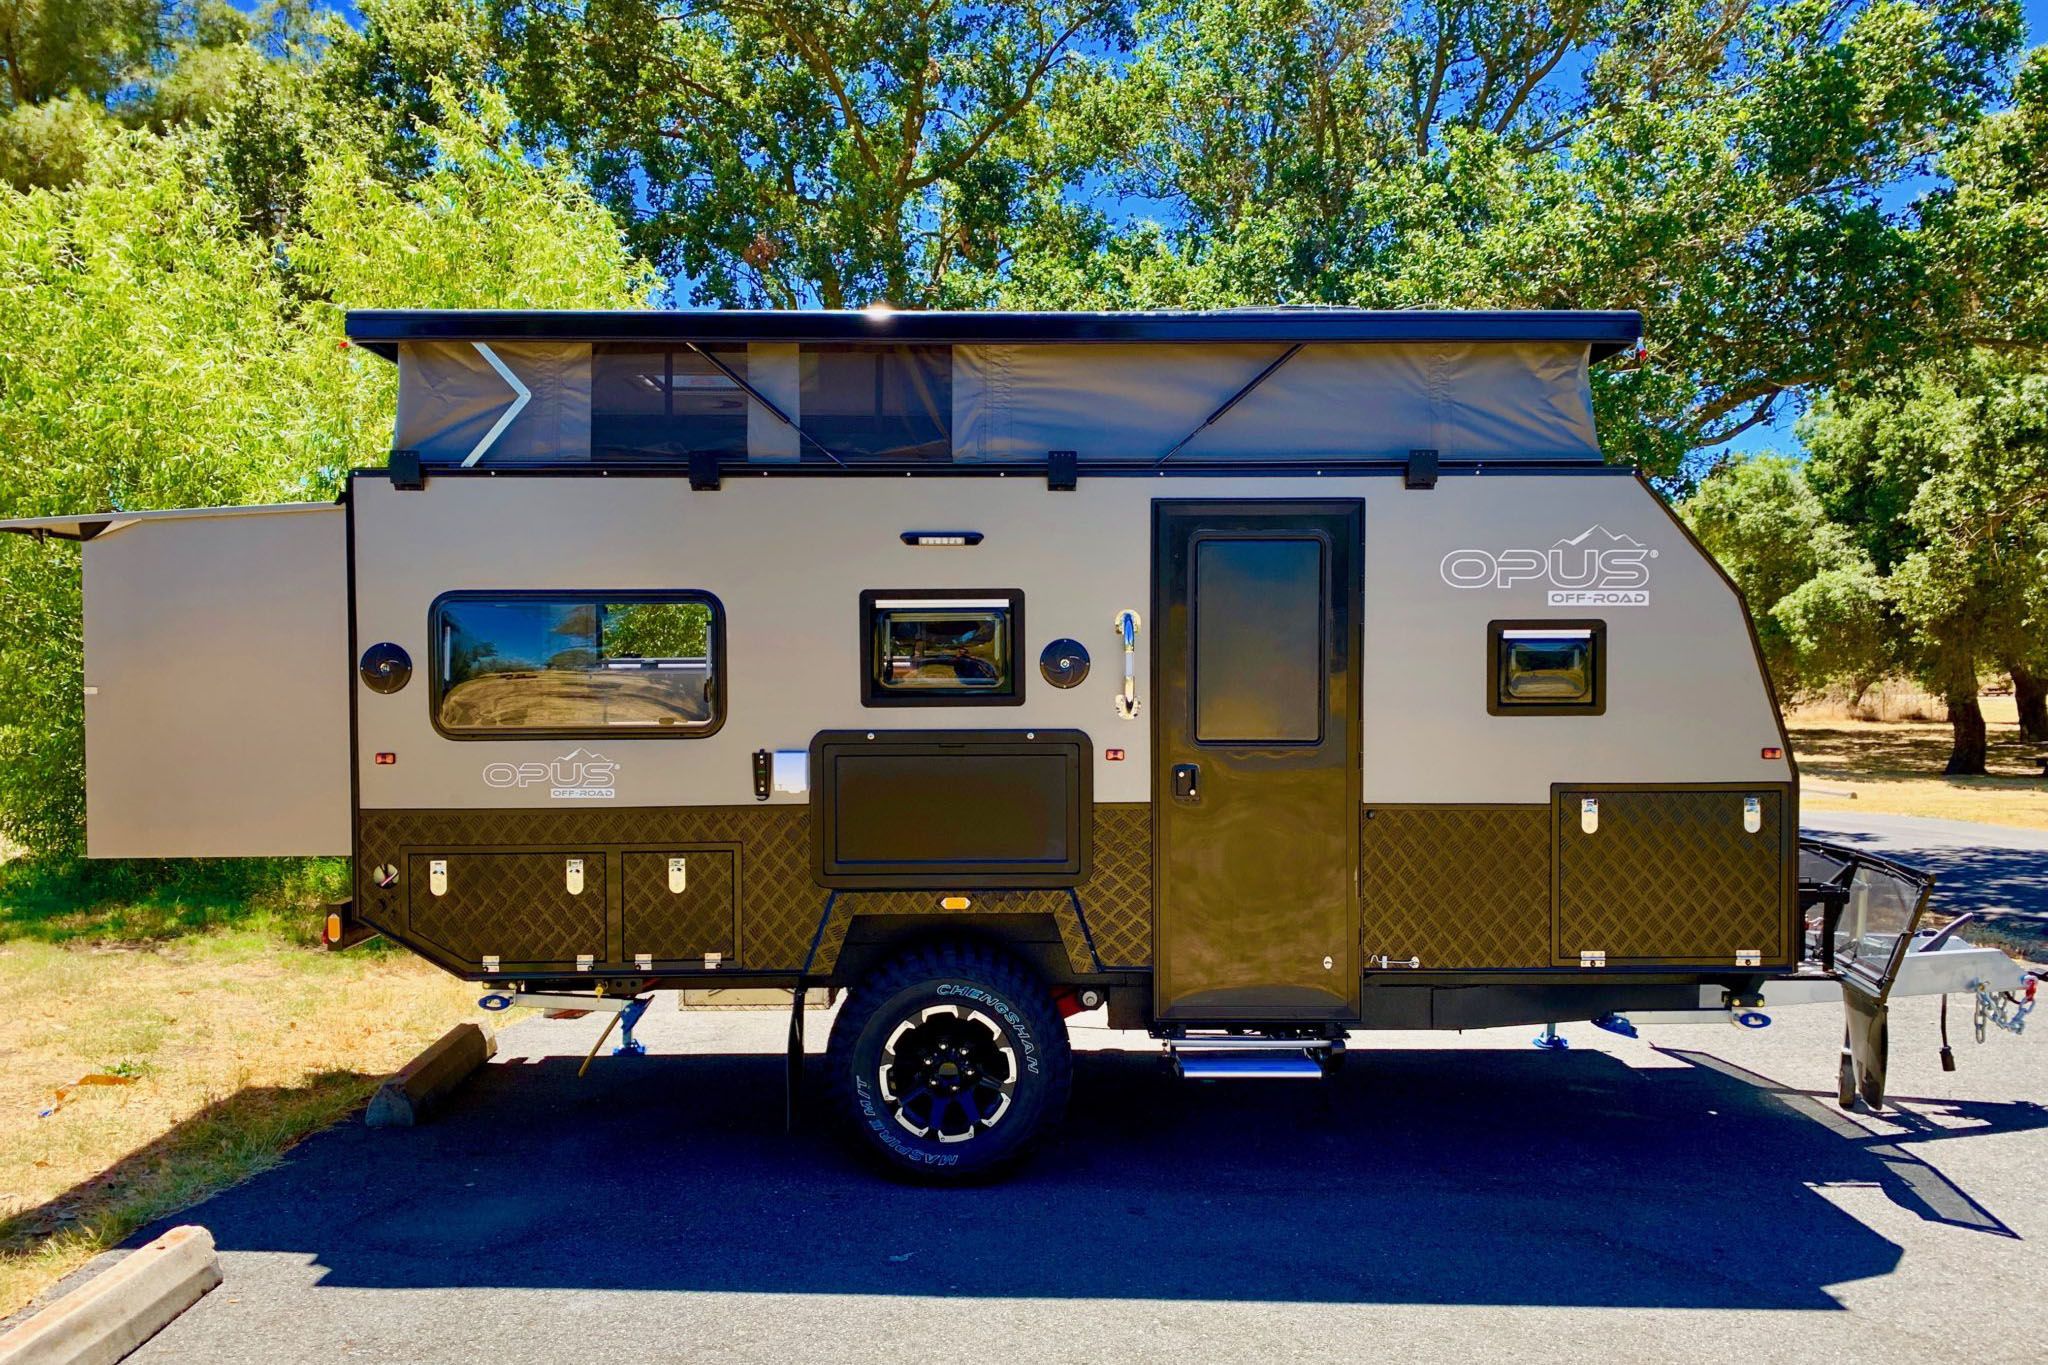 <p>Built with "tough luxury in mind," <a href="https://www.opuscamper.us/op15/">this tiny RV</a> includes a bamboo interior, a pullout stainless steel kitchen that includes a chopping board, prep deck and pantry access, as well as an electric Dometic cooler that has both refrigeration and freezing compartments, and a pop-up roof that provides extra headroom. </p>